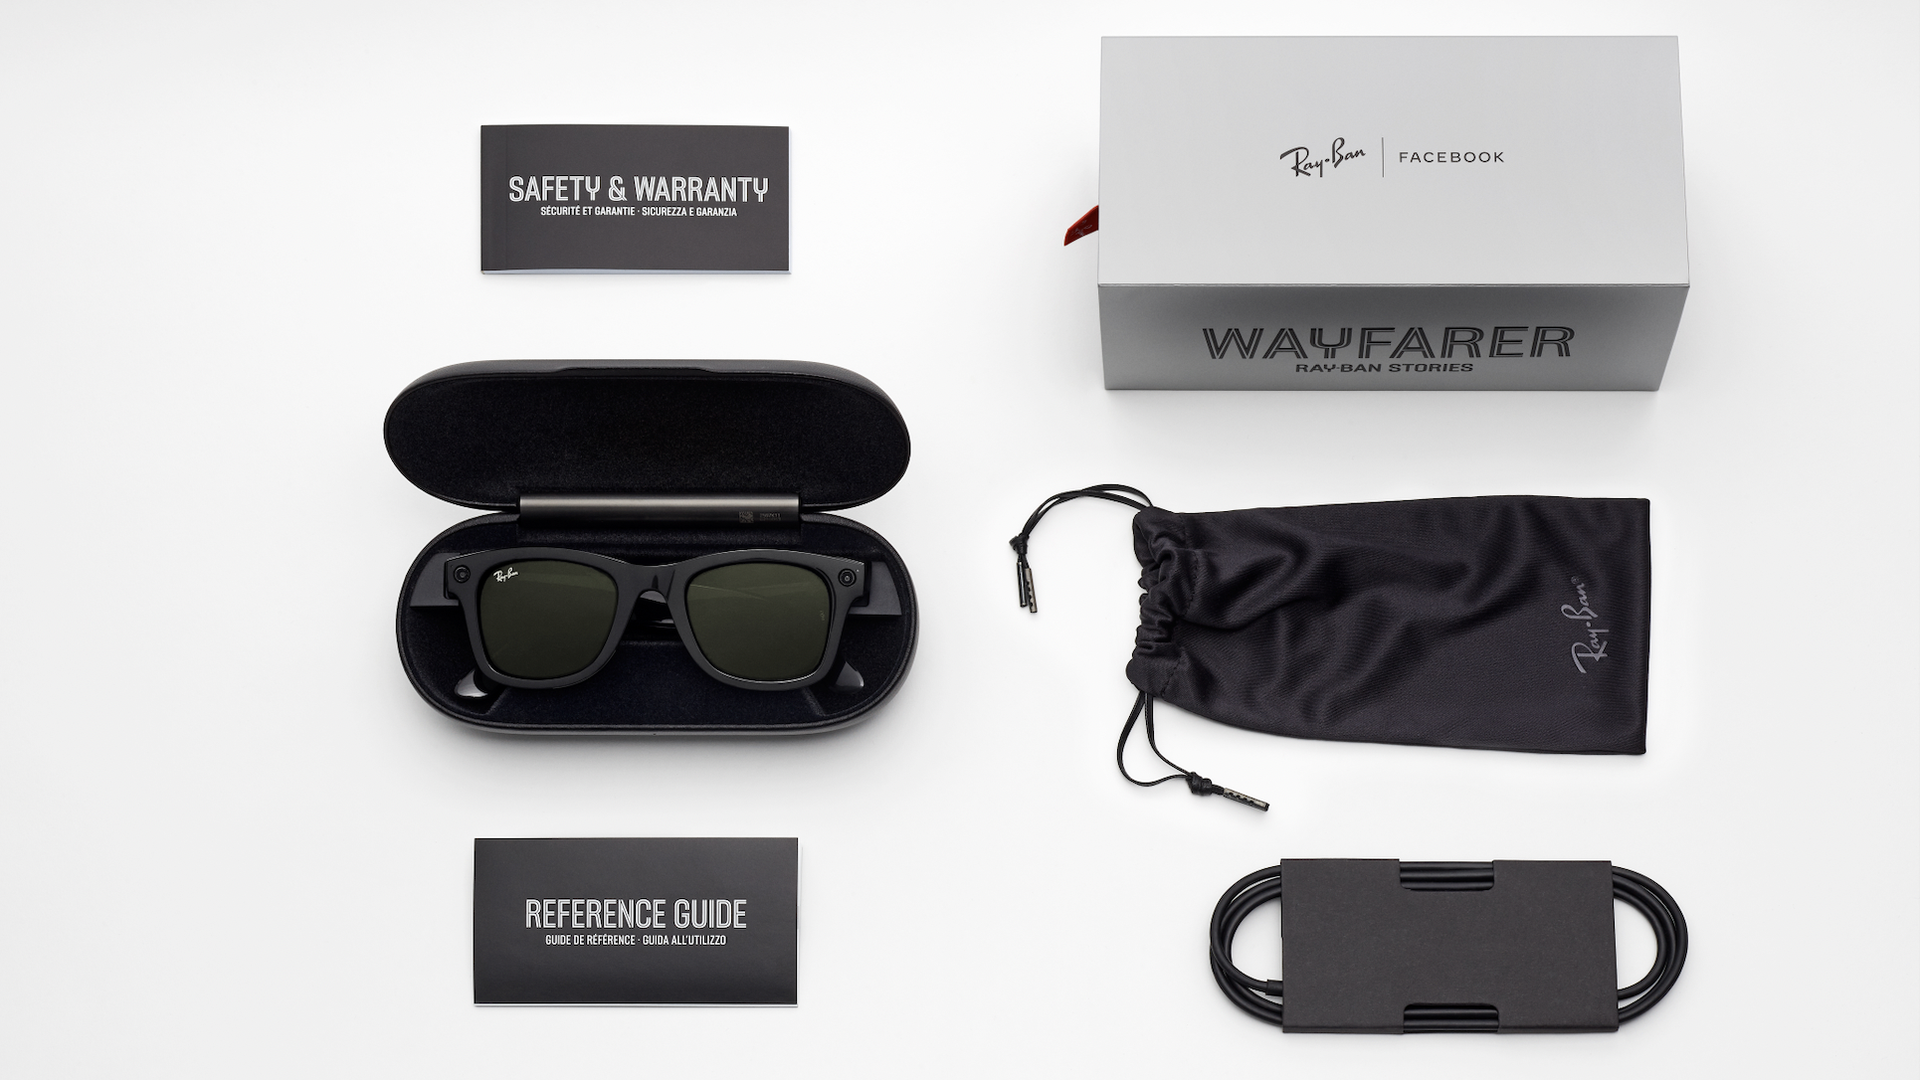 The Wayfarer version of Ray-Ban Stories smart glasses, along with accompanying packaging and accessories